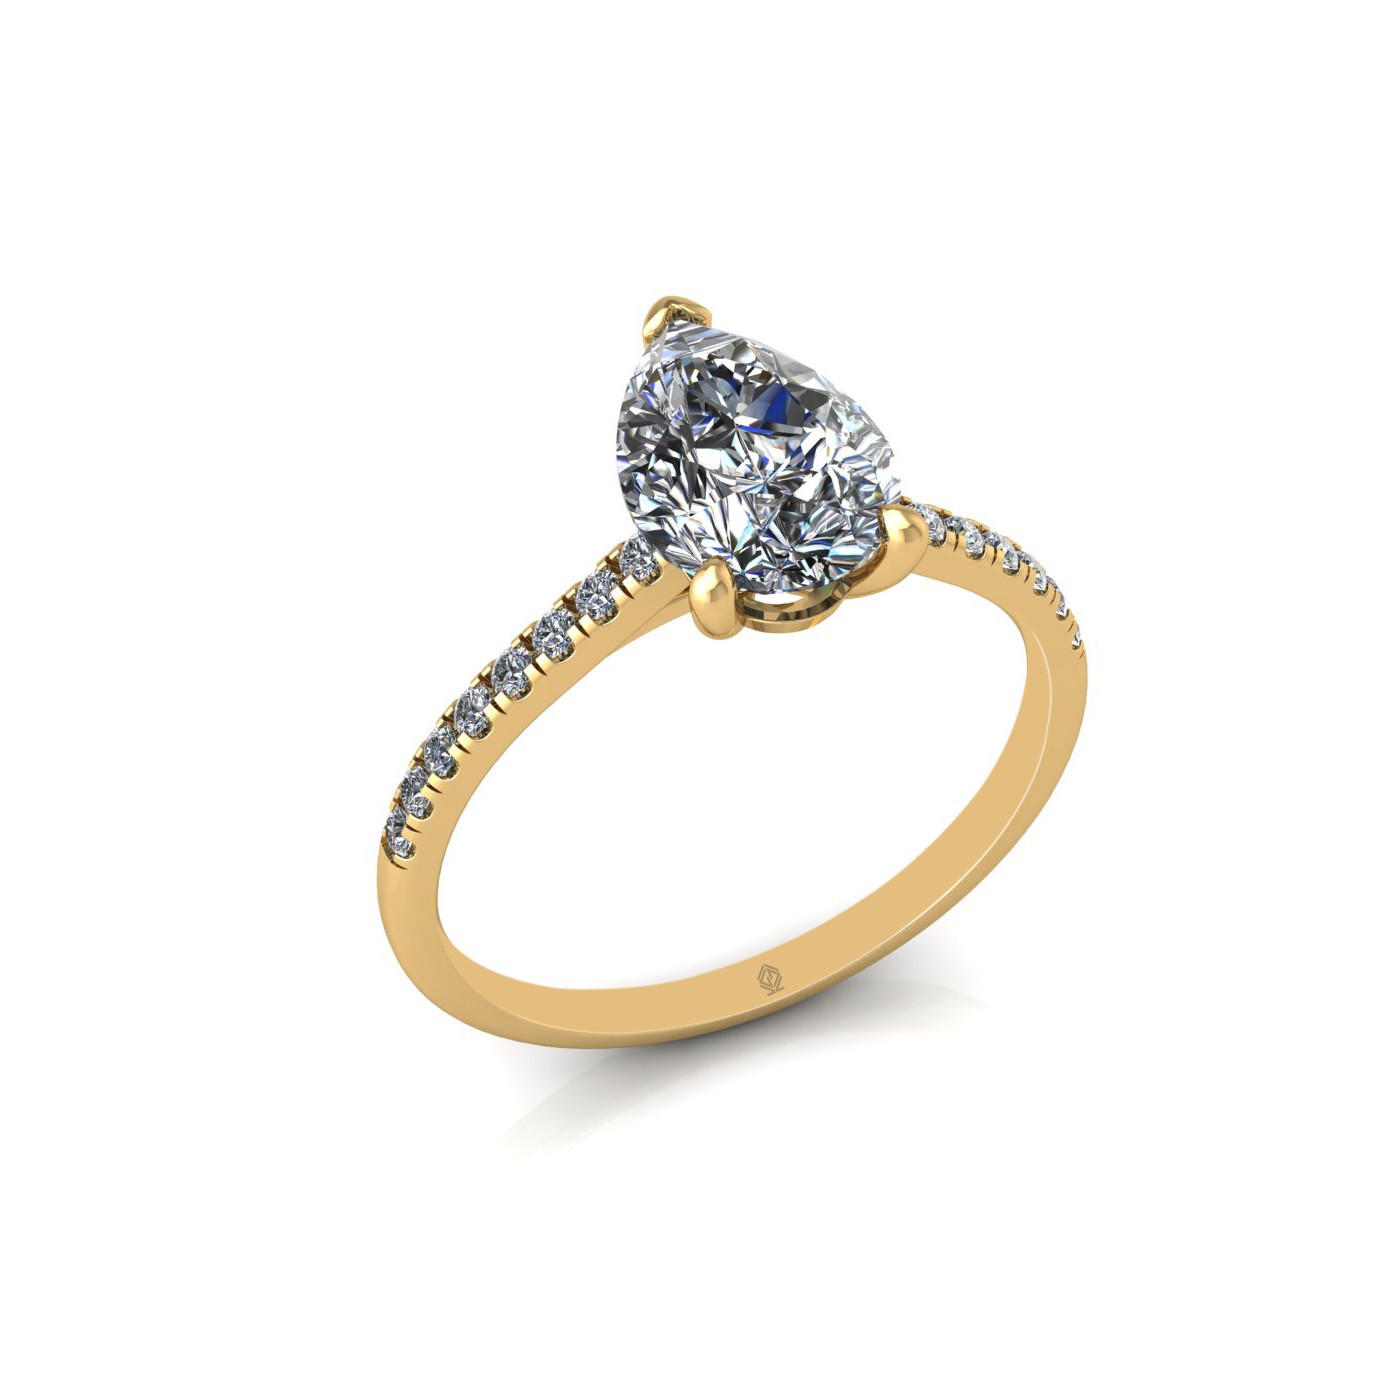 18k yellow gold 1,50 ct 3 prongs pear diamond engagement ring with whisper thin pavÉ set band